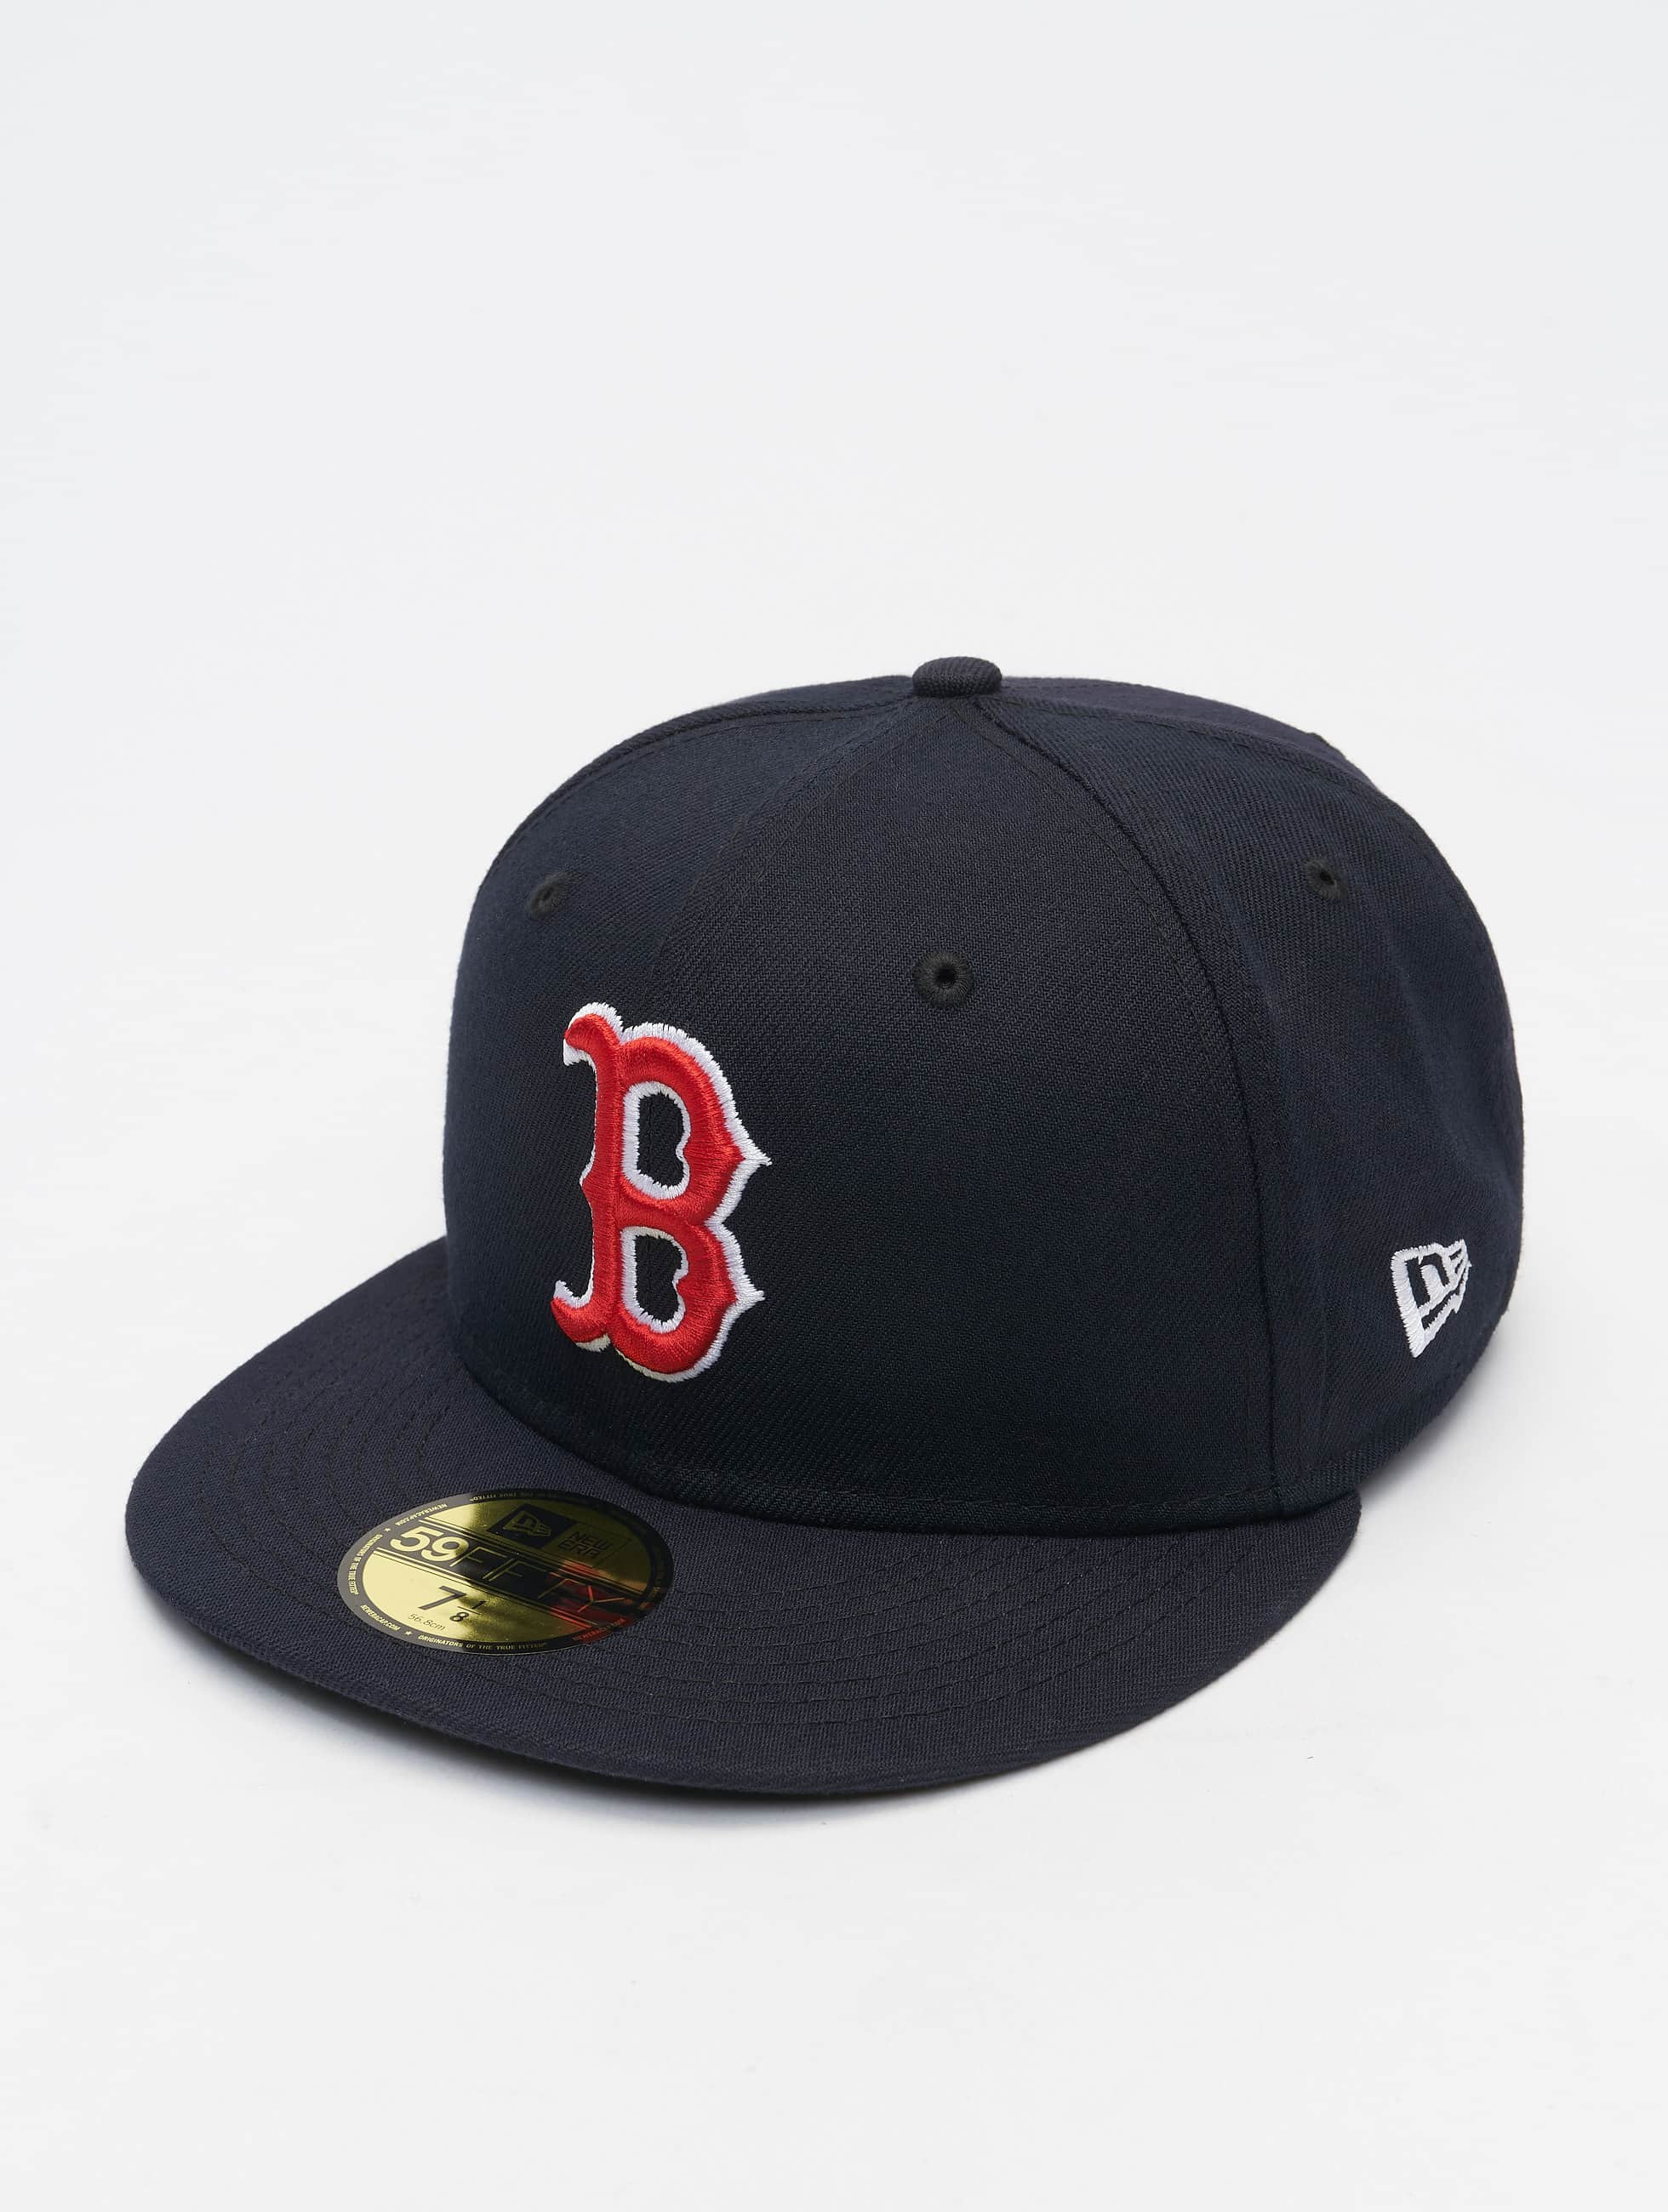 staan defect Erge, ernstige New Era Cap / Fitted Cap MLB Boston Red Sox ACPERF in blauw 818503